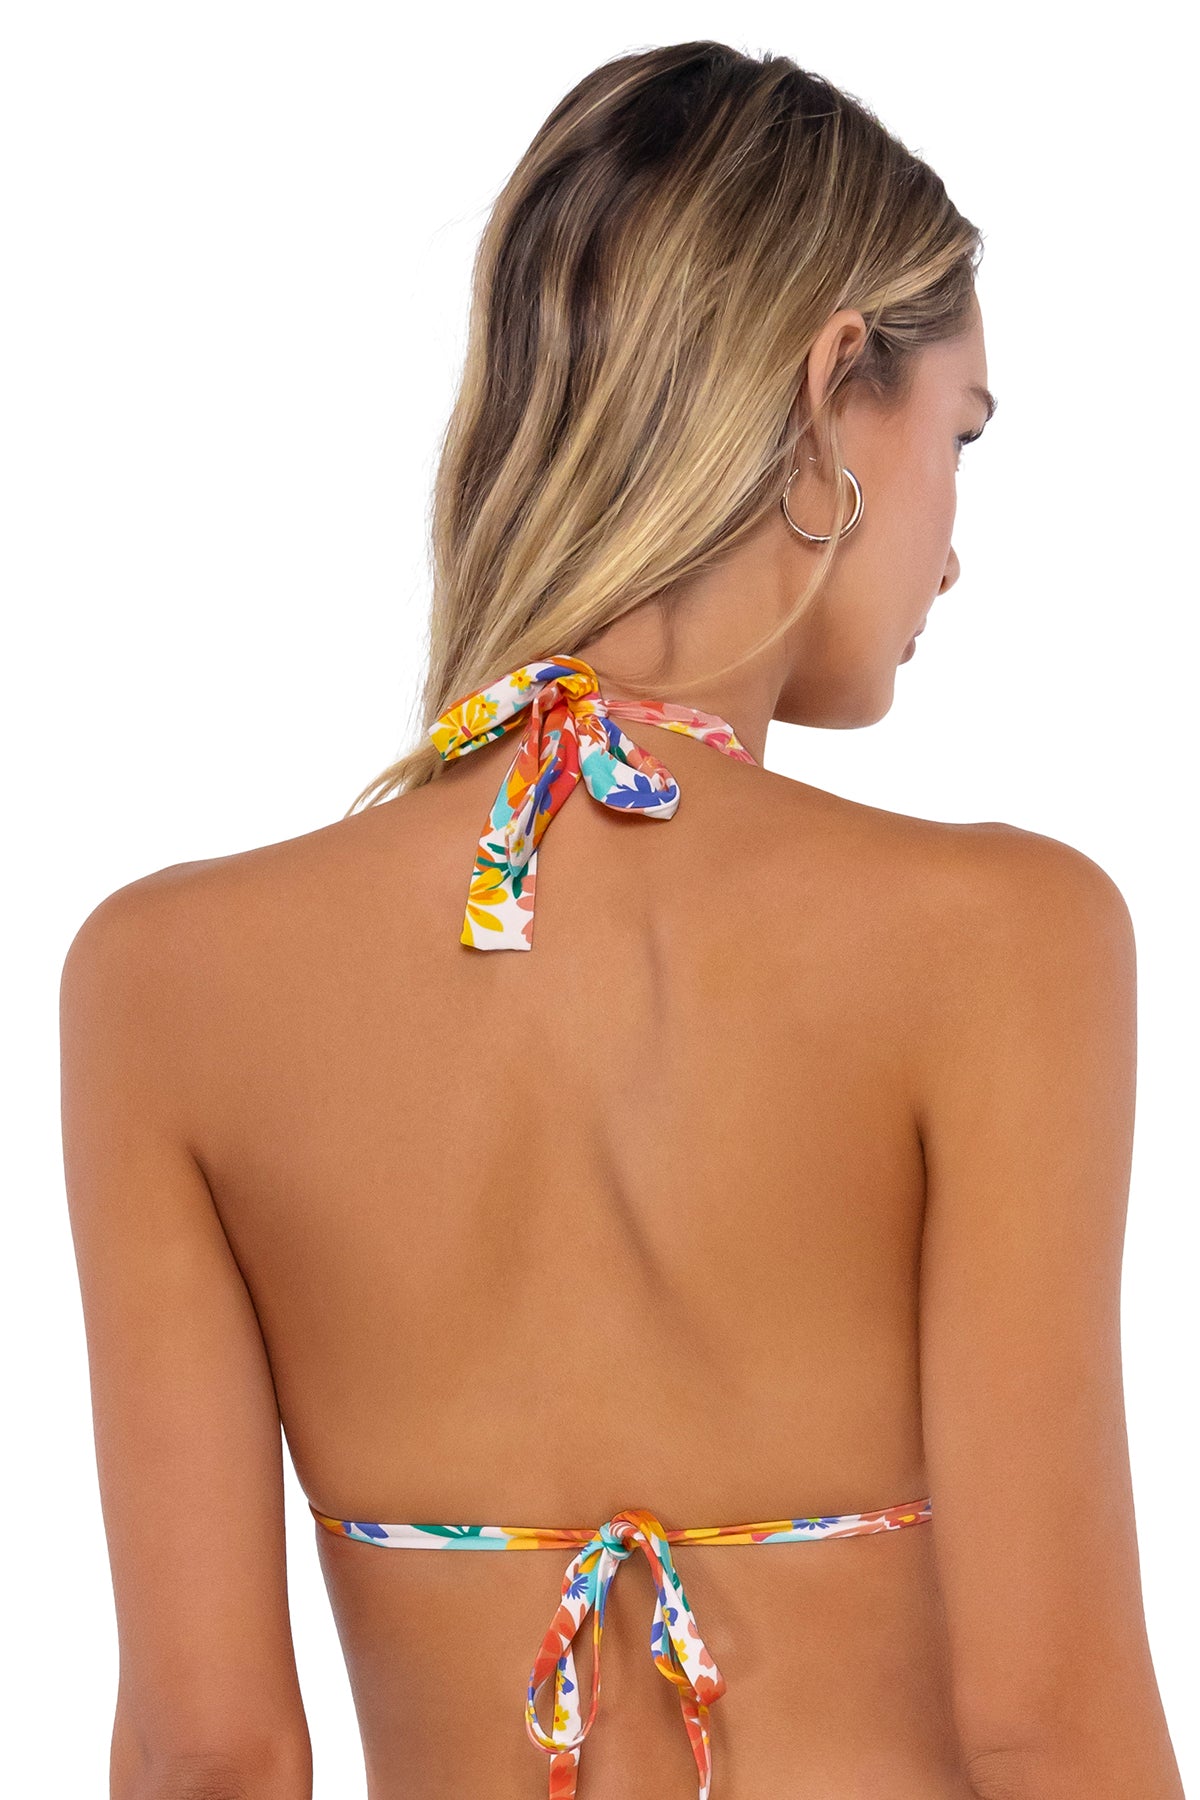 Back pose #1 of Jessica wearing Swim Systems Beach Blooms Mila Triangle Top